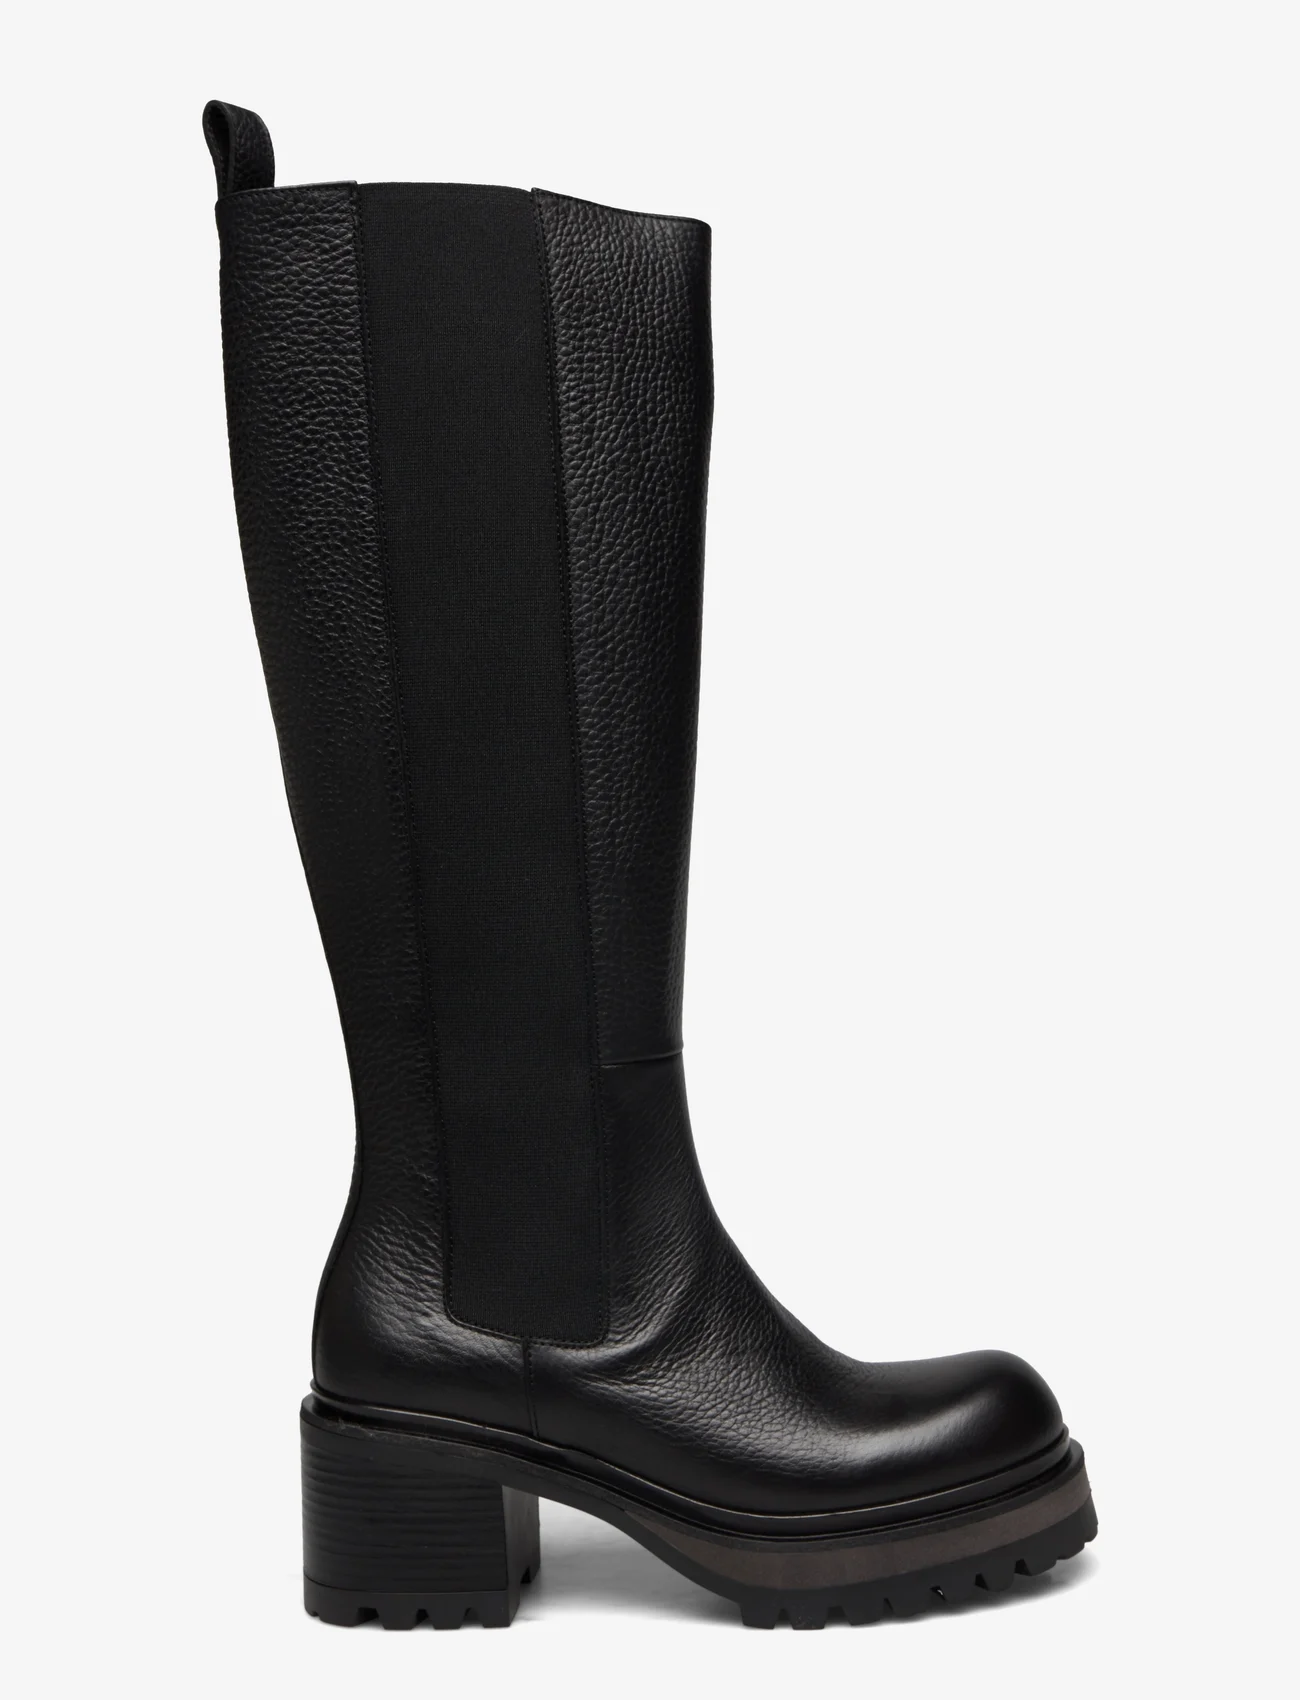 Laura Bellariva - ANKLE BOOTS - kniehohe stiefel - black - 1